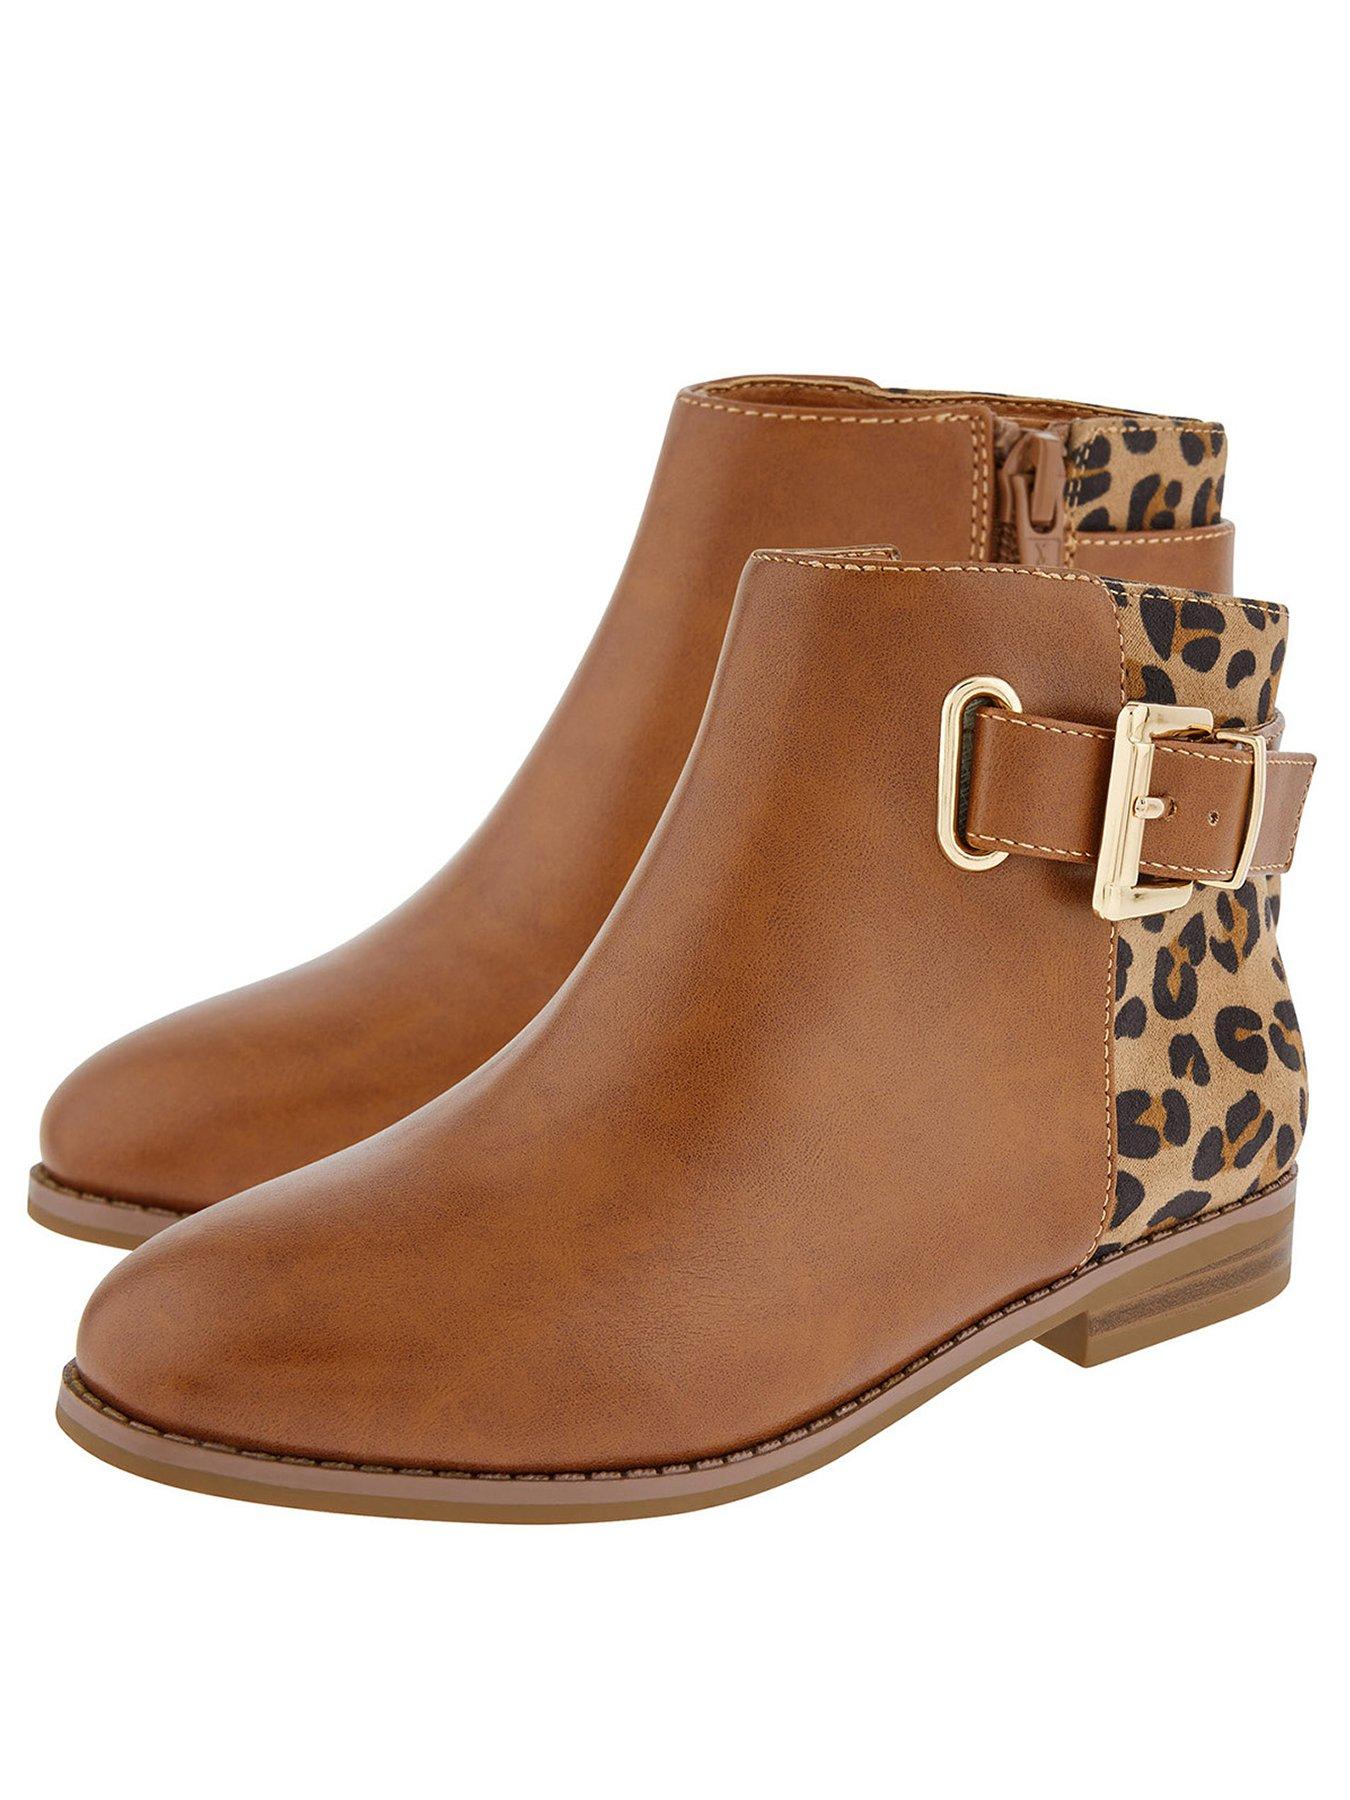 Girls Boots | Girls Shoes | Very.co.uk